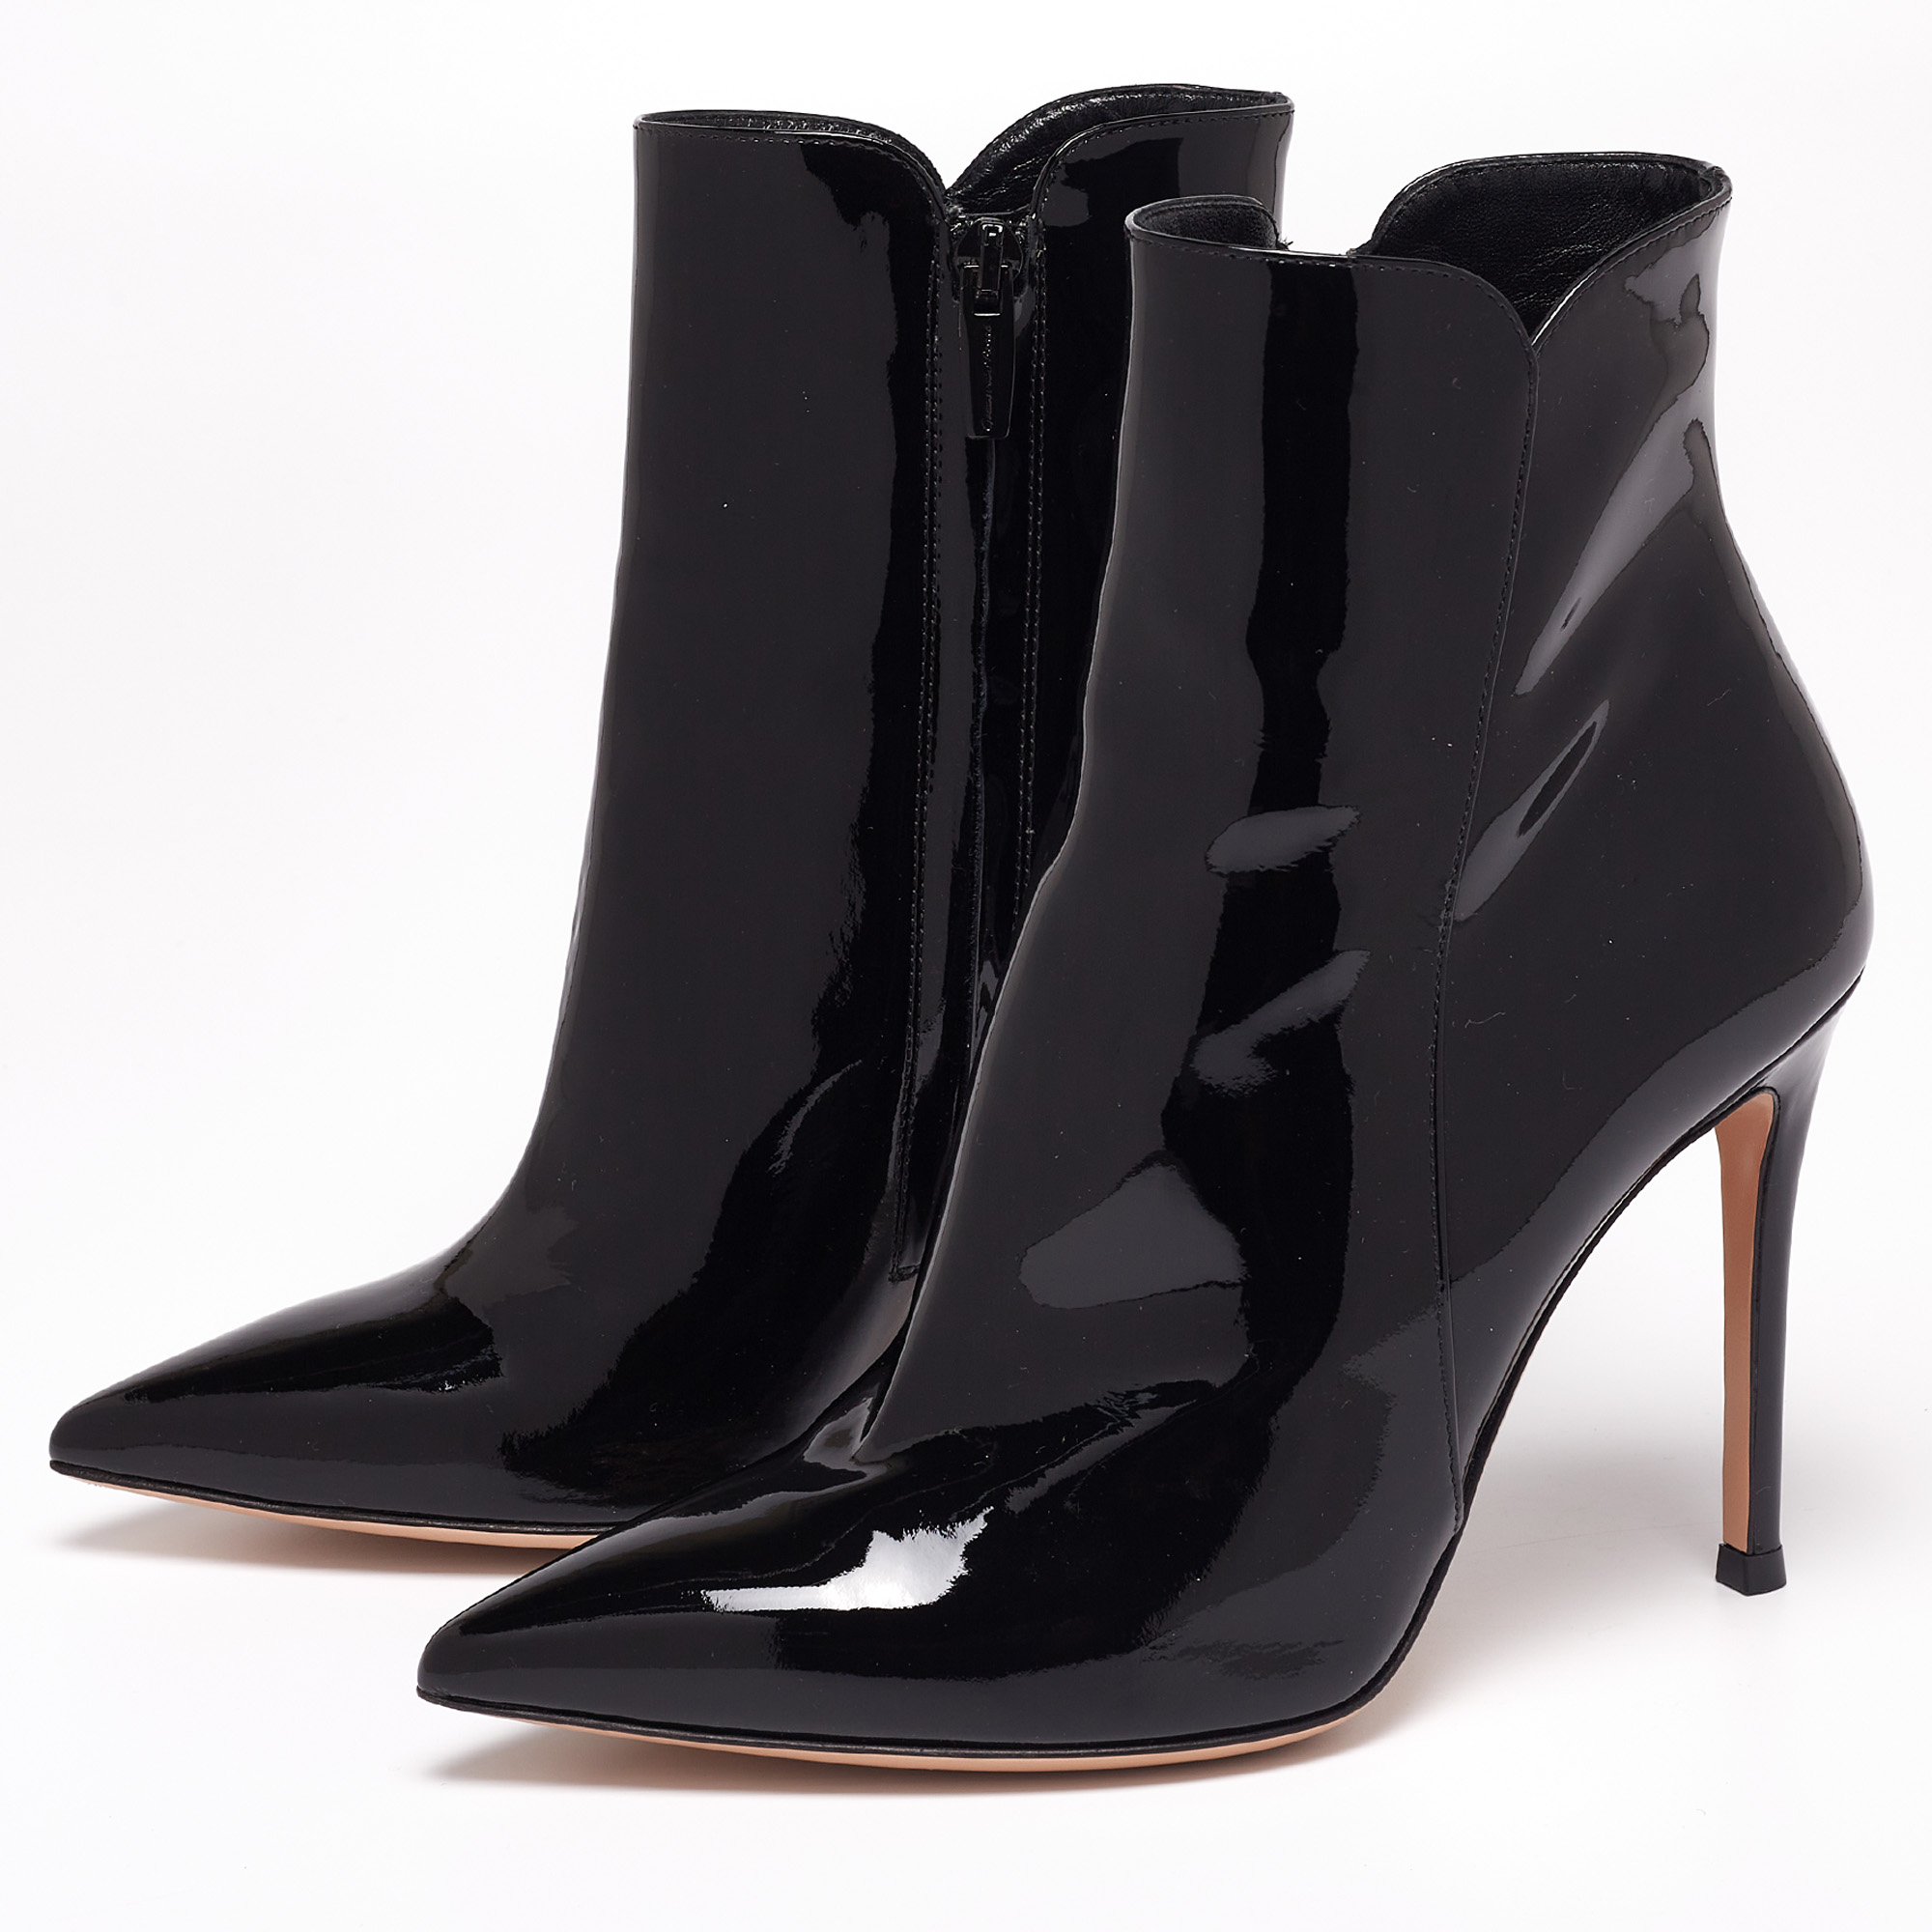 Gianvito Rossi Black Patent Leather Zipper Ankle Boots Size 36.5  - buy with discount